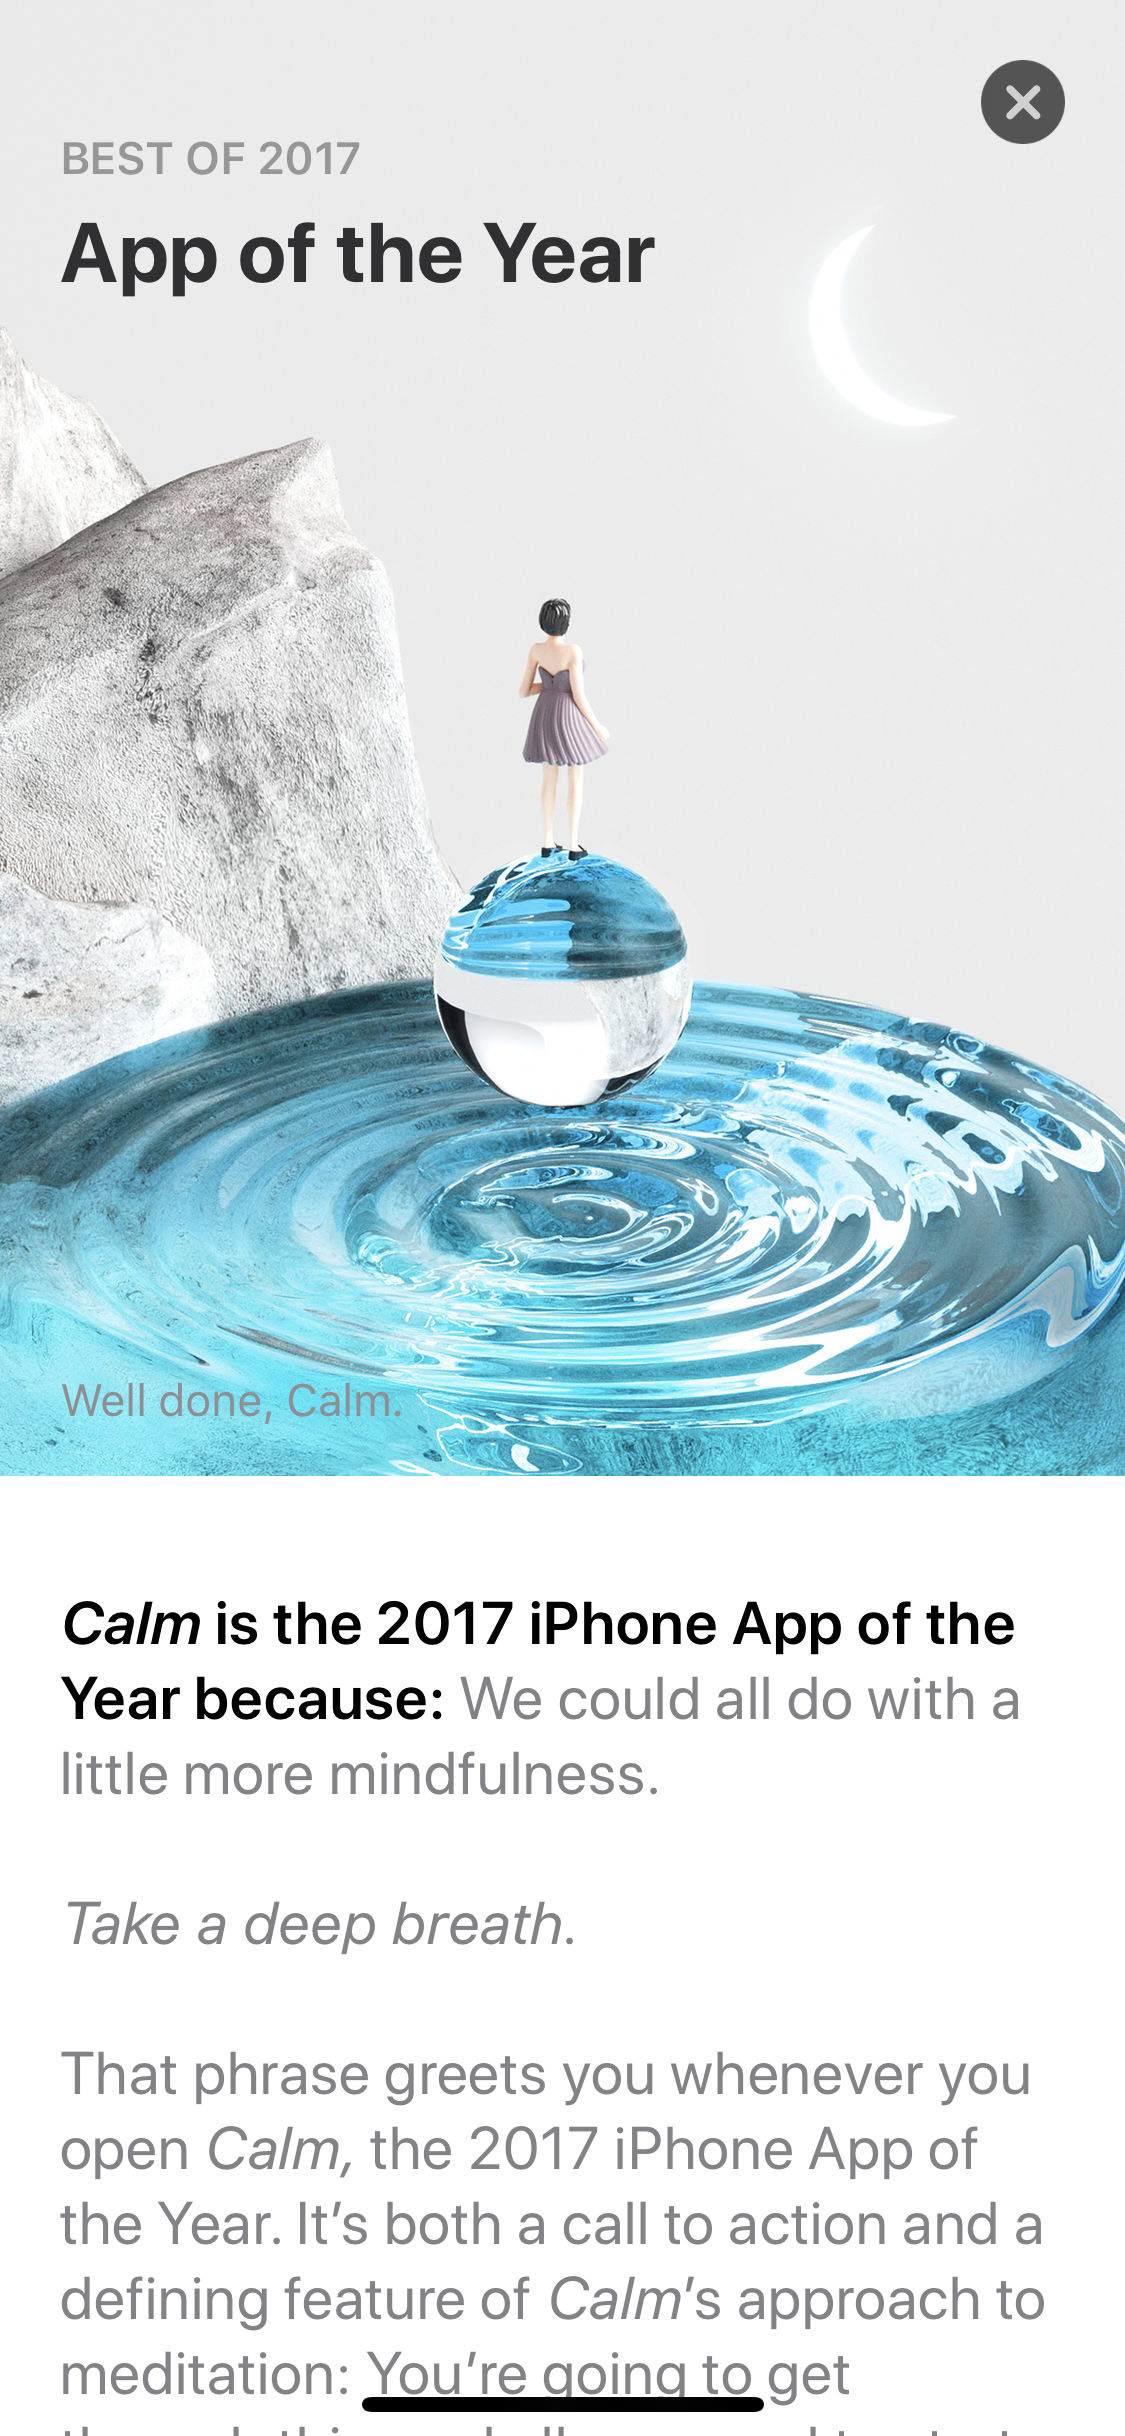 Apple Announces Top Apps and Games of 2017 [Charts]